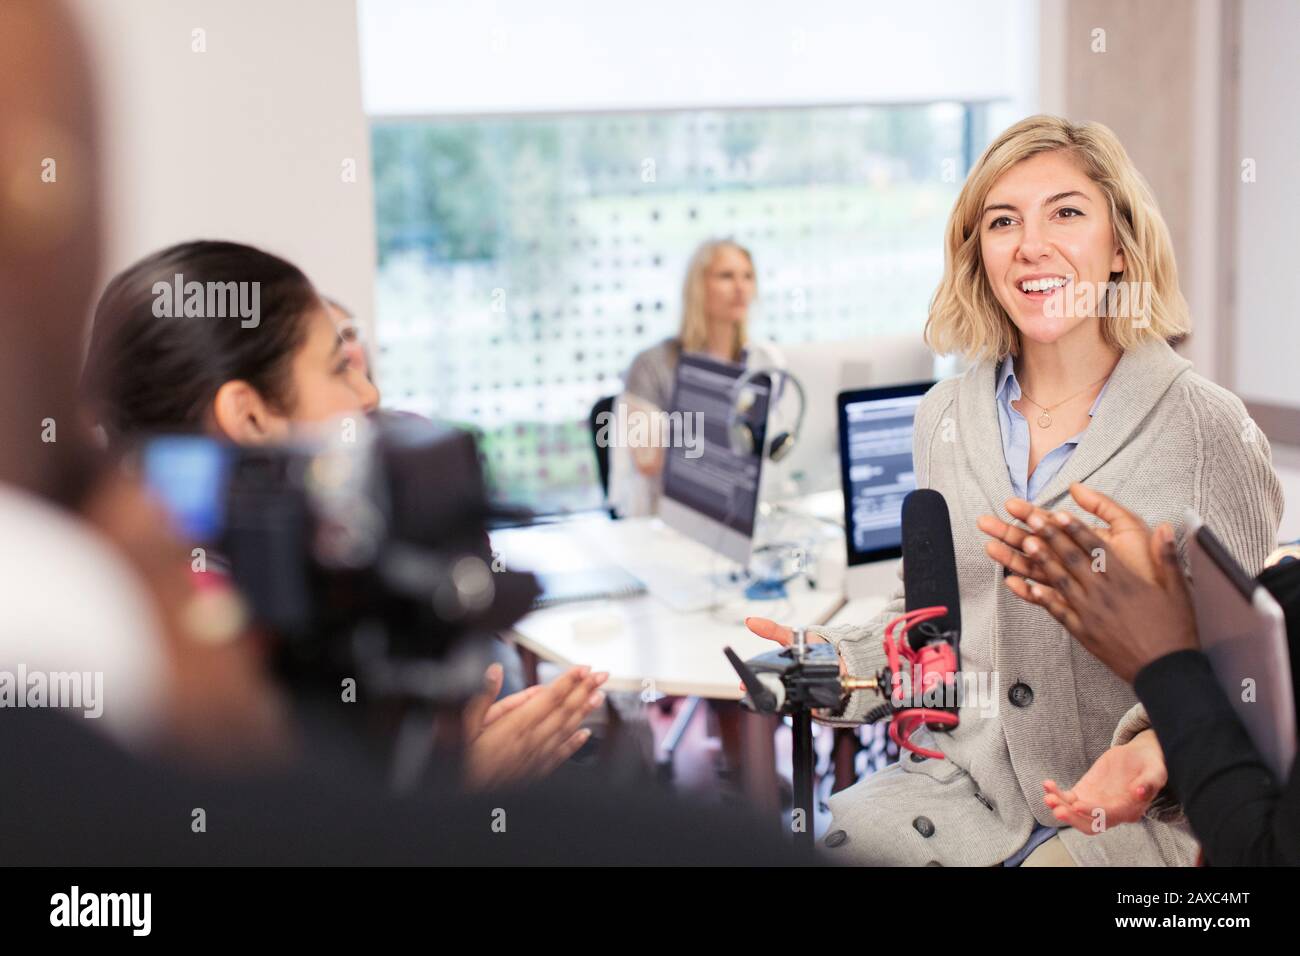 Classmates clapping for woman at microphone in journalism class Stock Photo